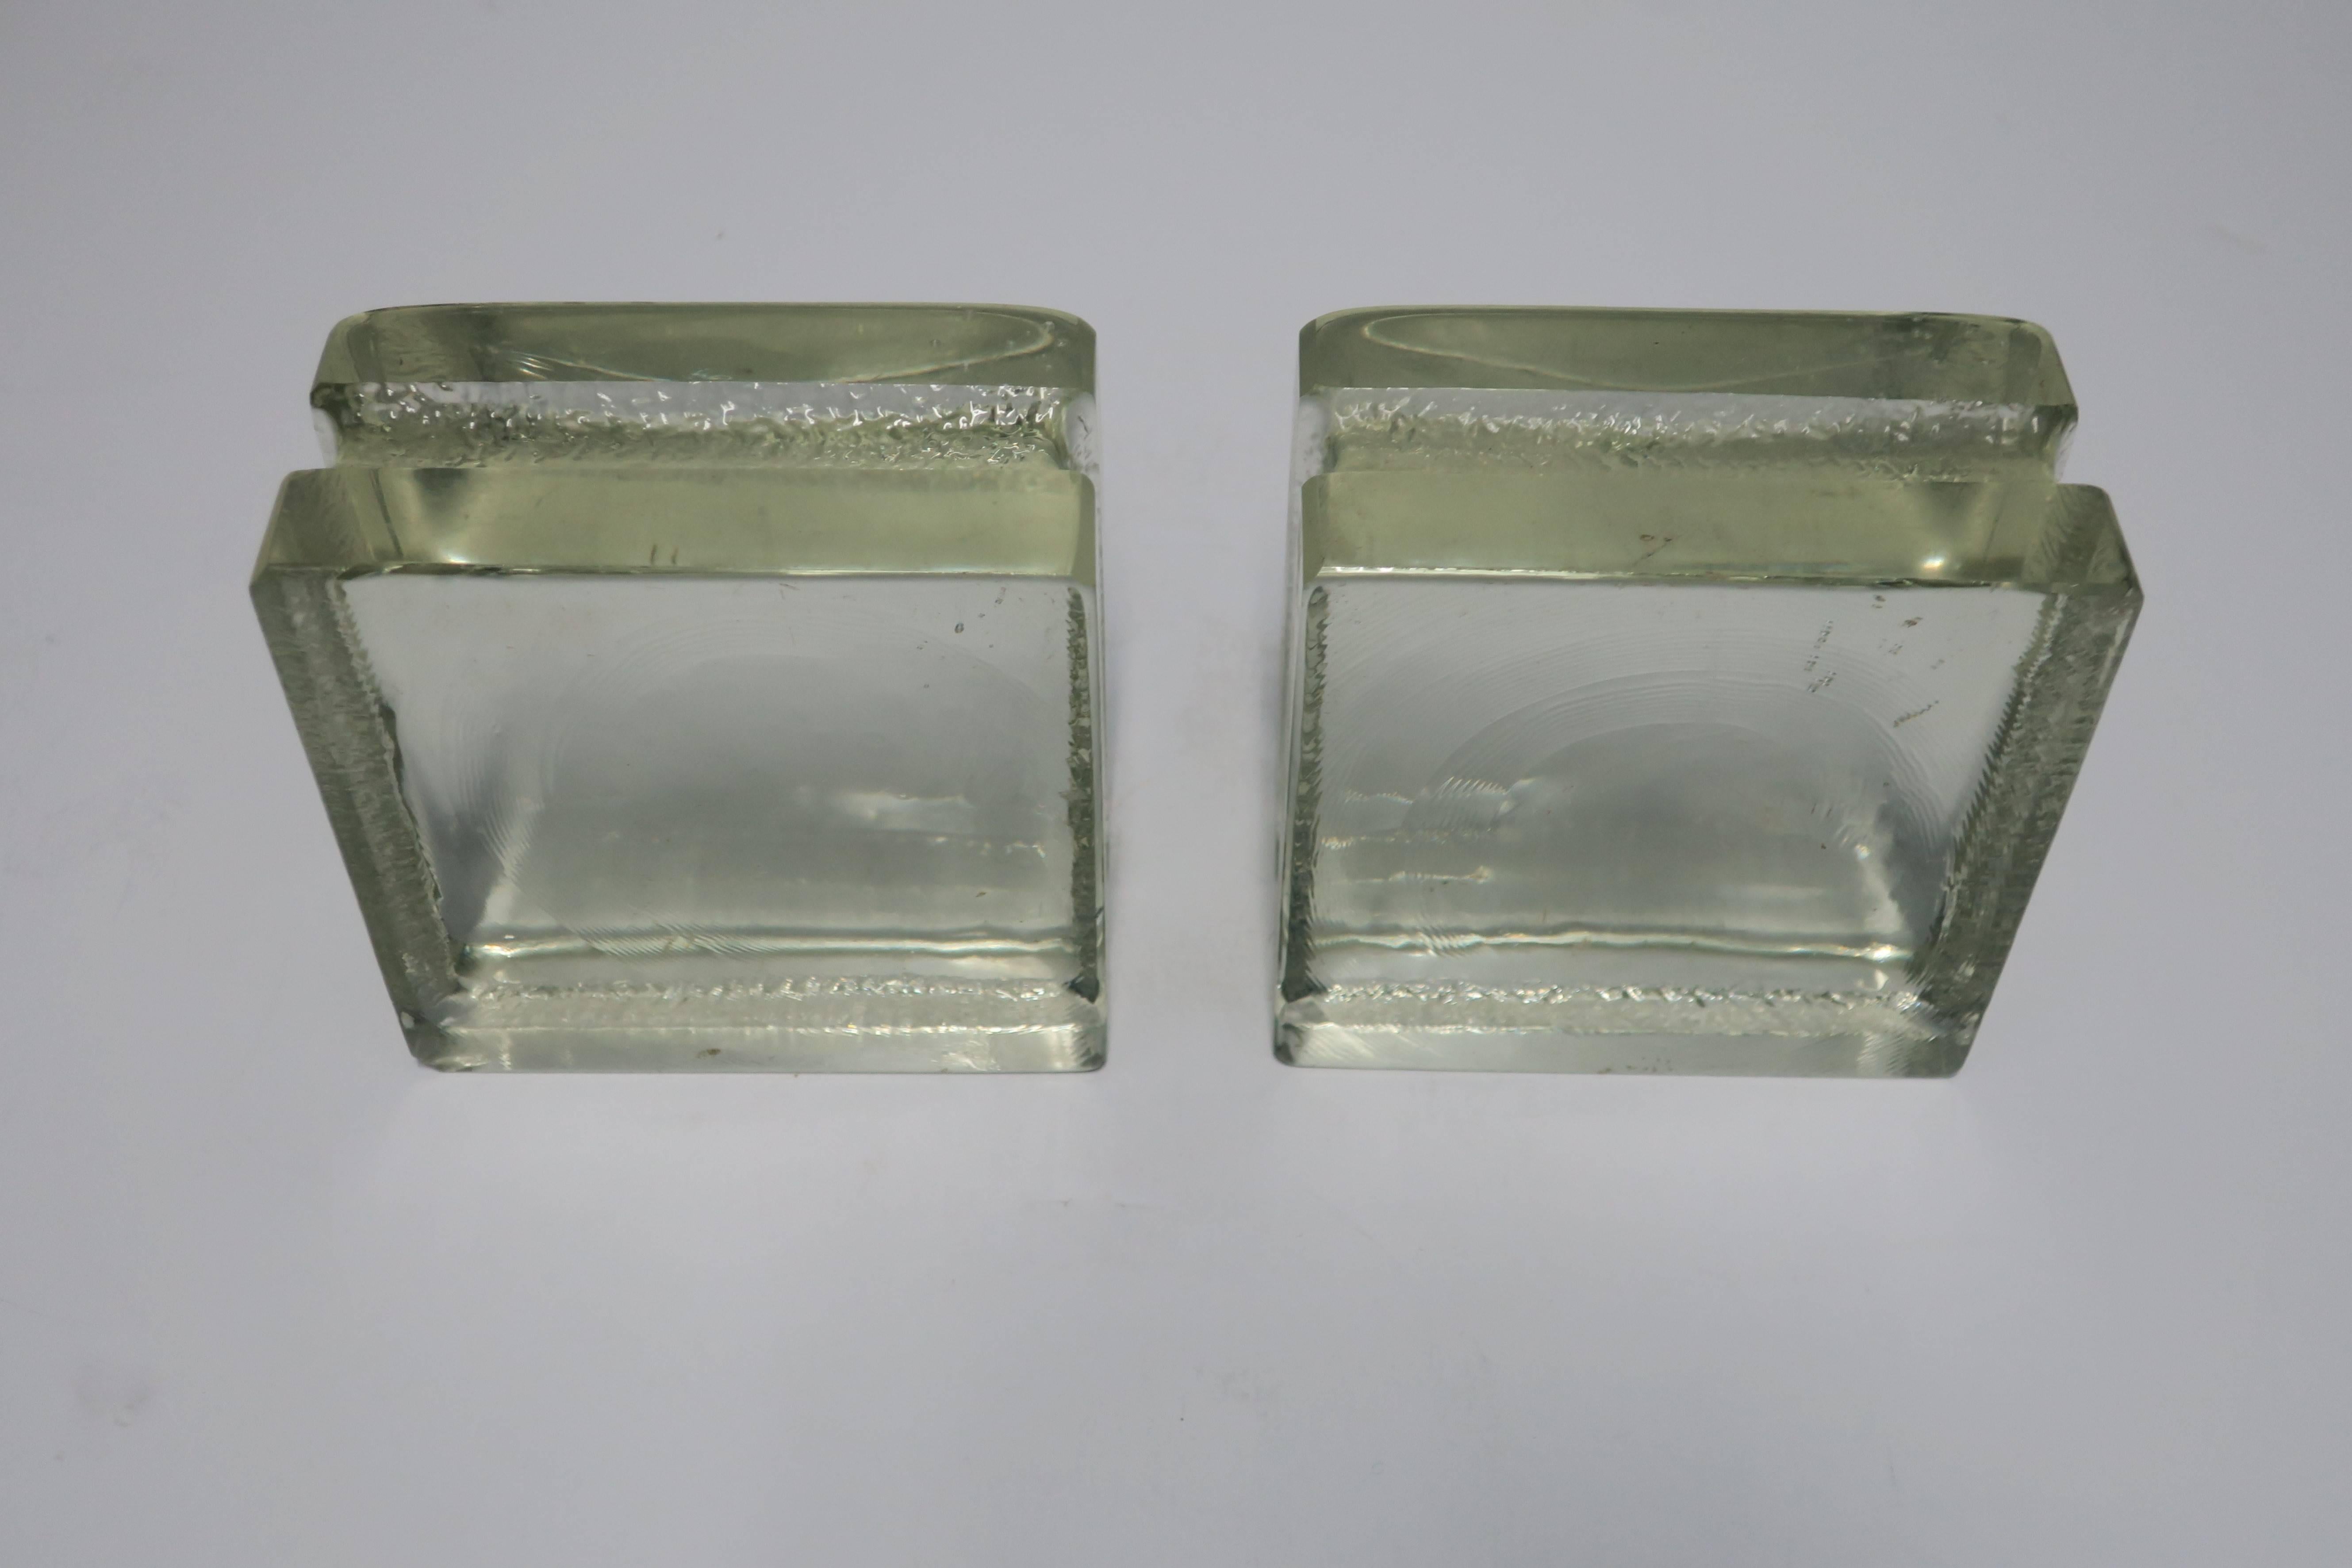 Pair of Modern Solid Glass-Block Bookends 2